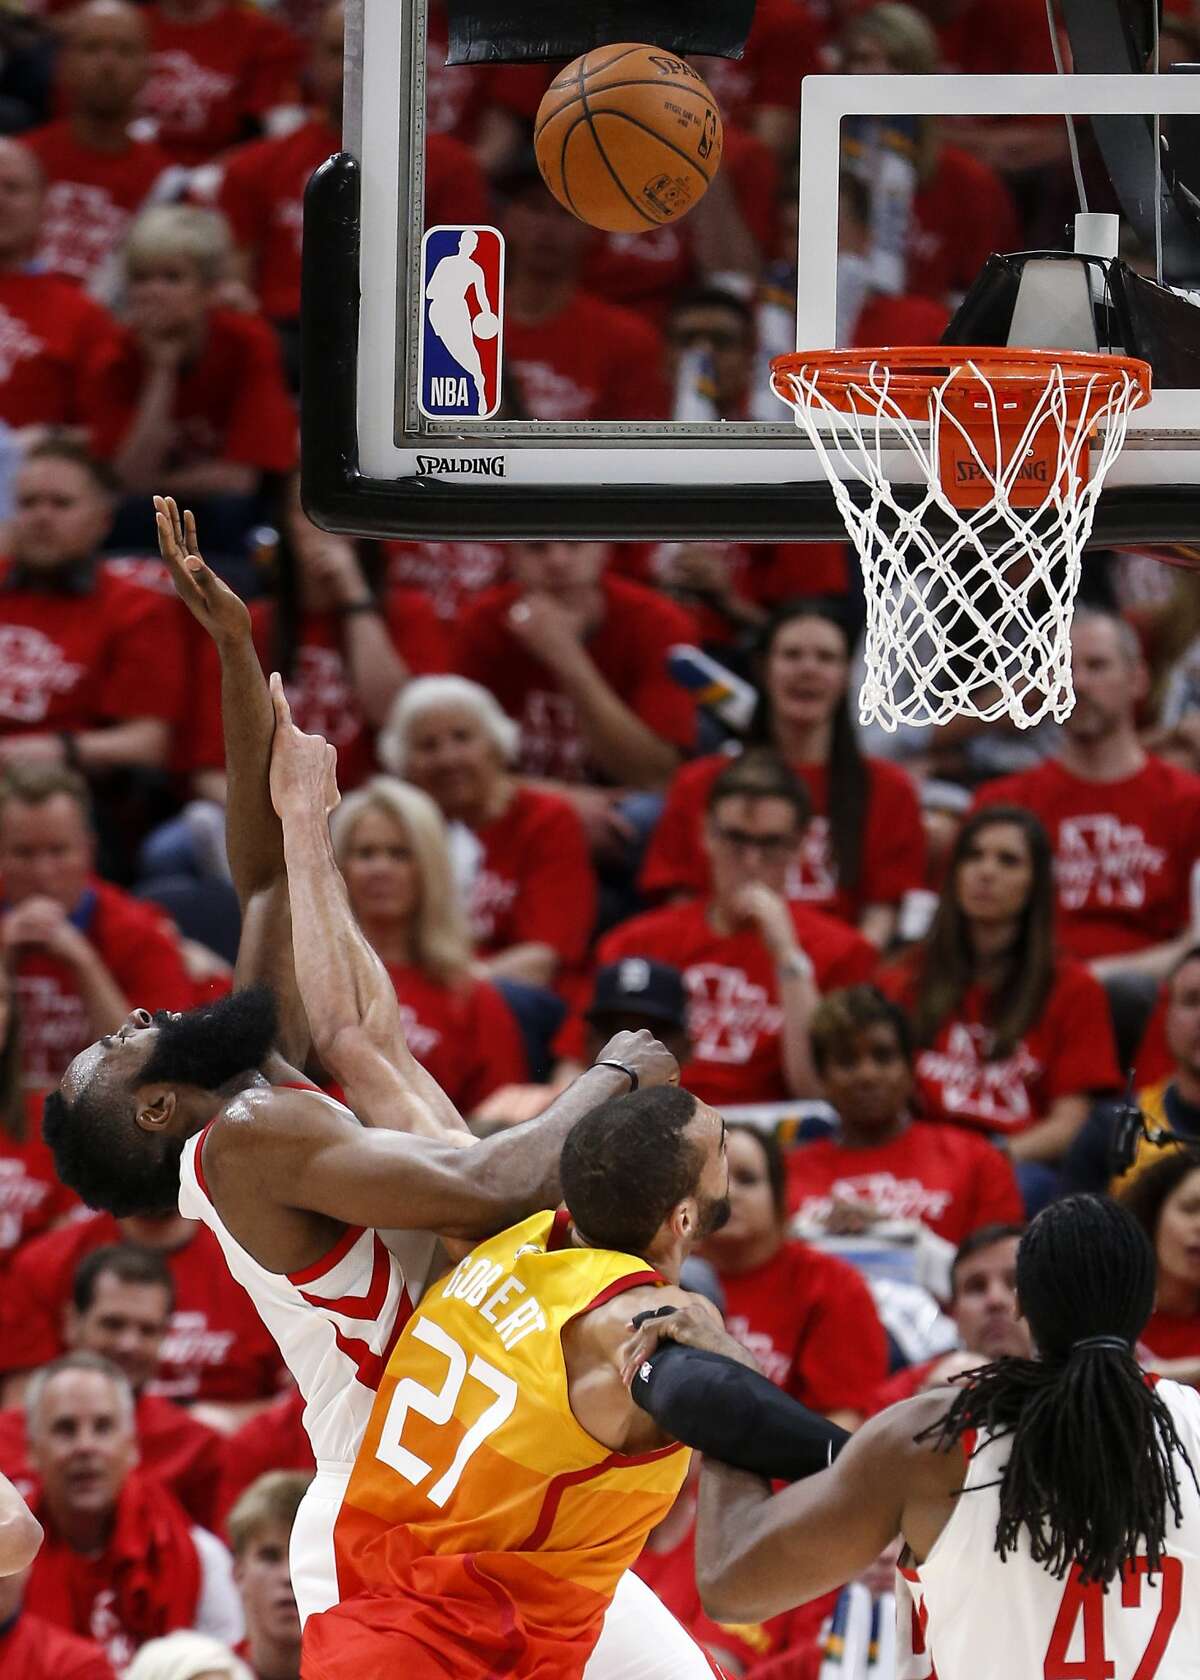 Houston Rockets guard James Harden (13) is fouled by Utah Jazz center Rudy Gobert (27) as he takes a shot during the second half of Game 3 of the NBA second-round playoff series at Vivint Smart Home Arena Friday, May 4, 2018 in Salt Lake City. (Michael Ciaglo / Houston Chronicle)